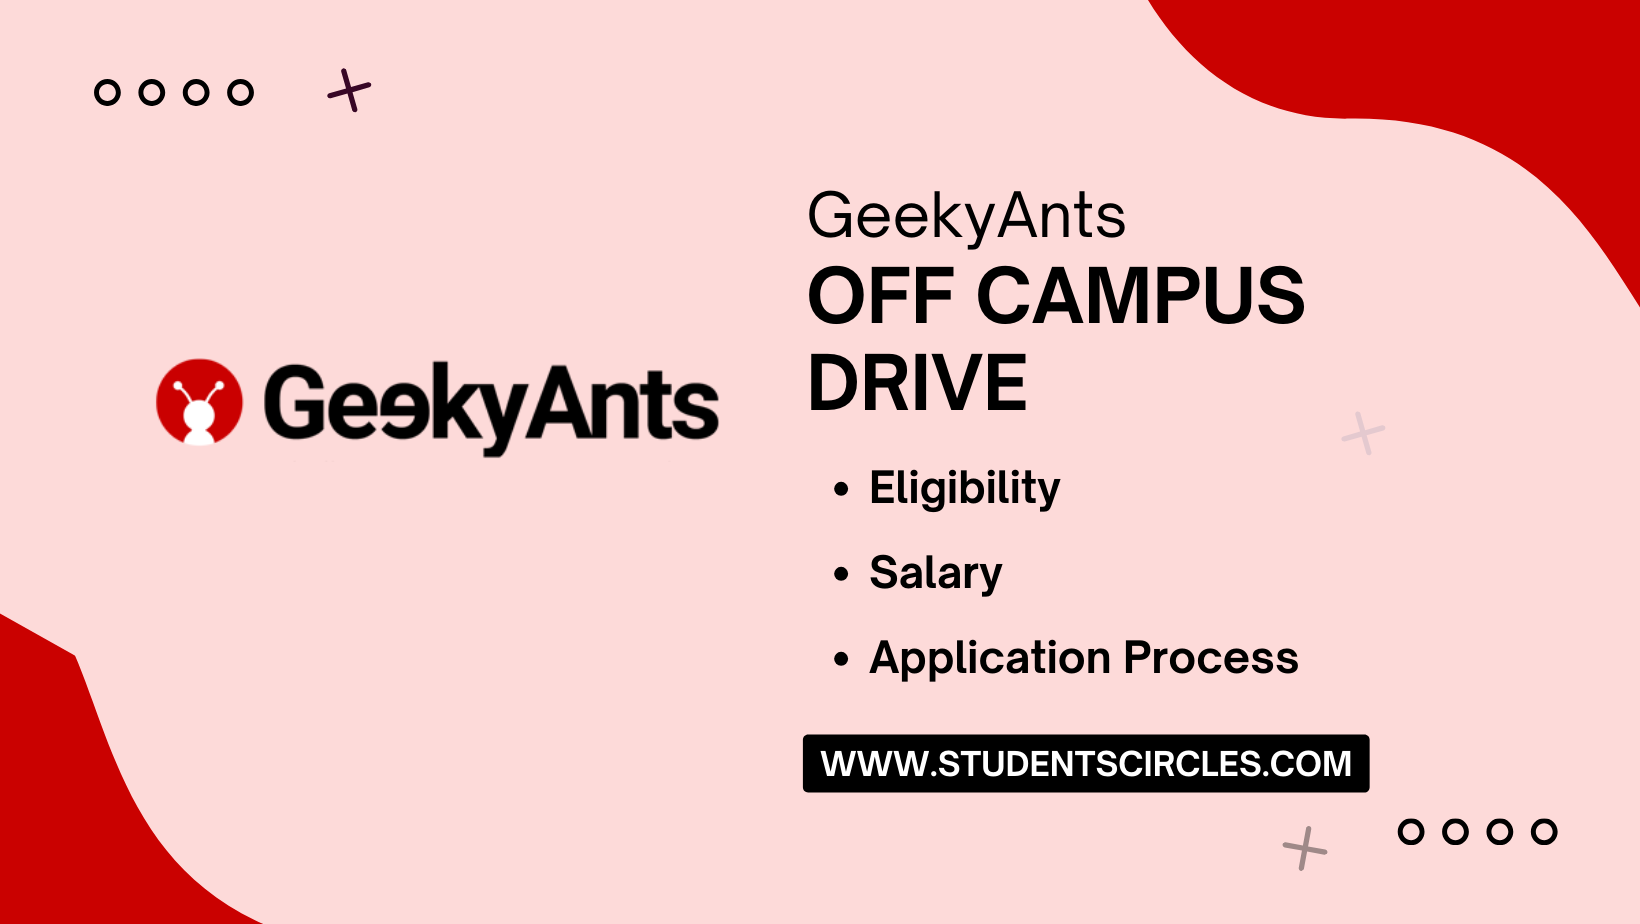 GeekyAnts Off Campus Drive